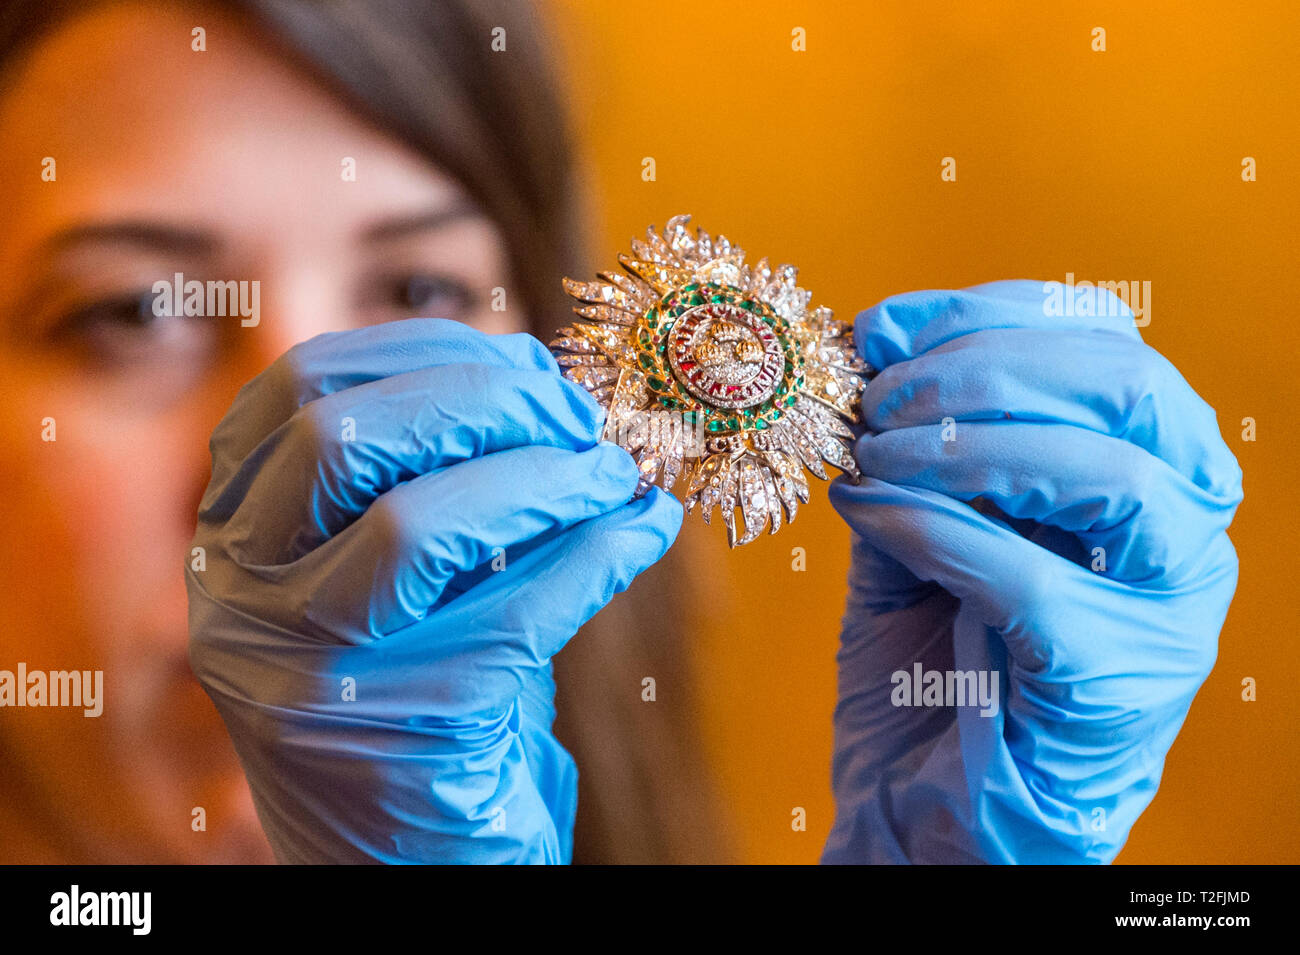 London, UK.  2 April 2019. A curator poses with Queen Victoria's Star and Collar of the Order of the Bath. Preview of "Queen Victoria's Palace" exhibition at Buckingham Palace.  The special exhibition marks the 200th anniversary of the birth of Queen Victoria (1819-1901) and tell the story of her 62 year reign and her life at Buckingham Palace.  Over 80 objects will be displayed as part of the Summer Opening of the State Rooms 20 July to 29 September 2019.  Credit: Stephen Chung / Alamy Live News Stock Photo